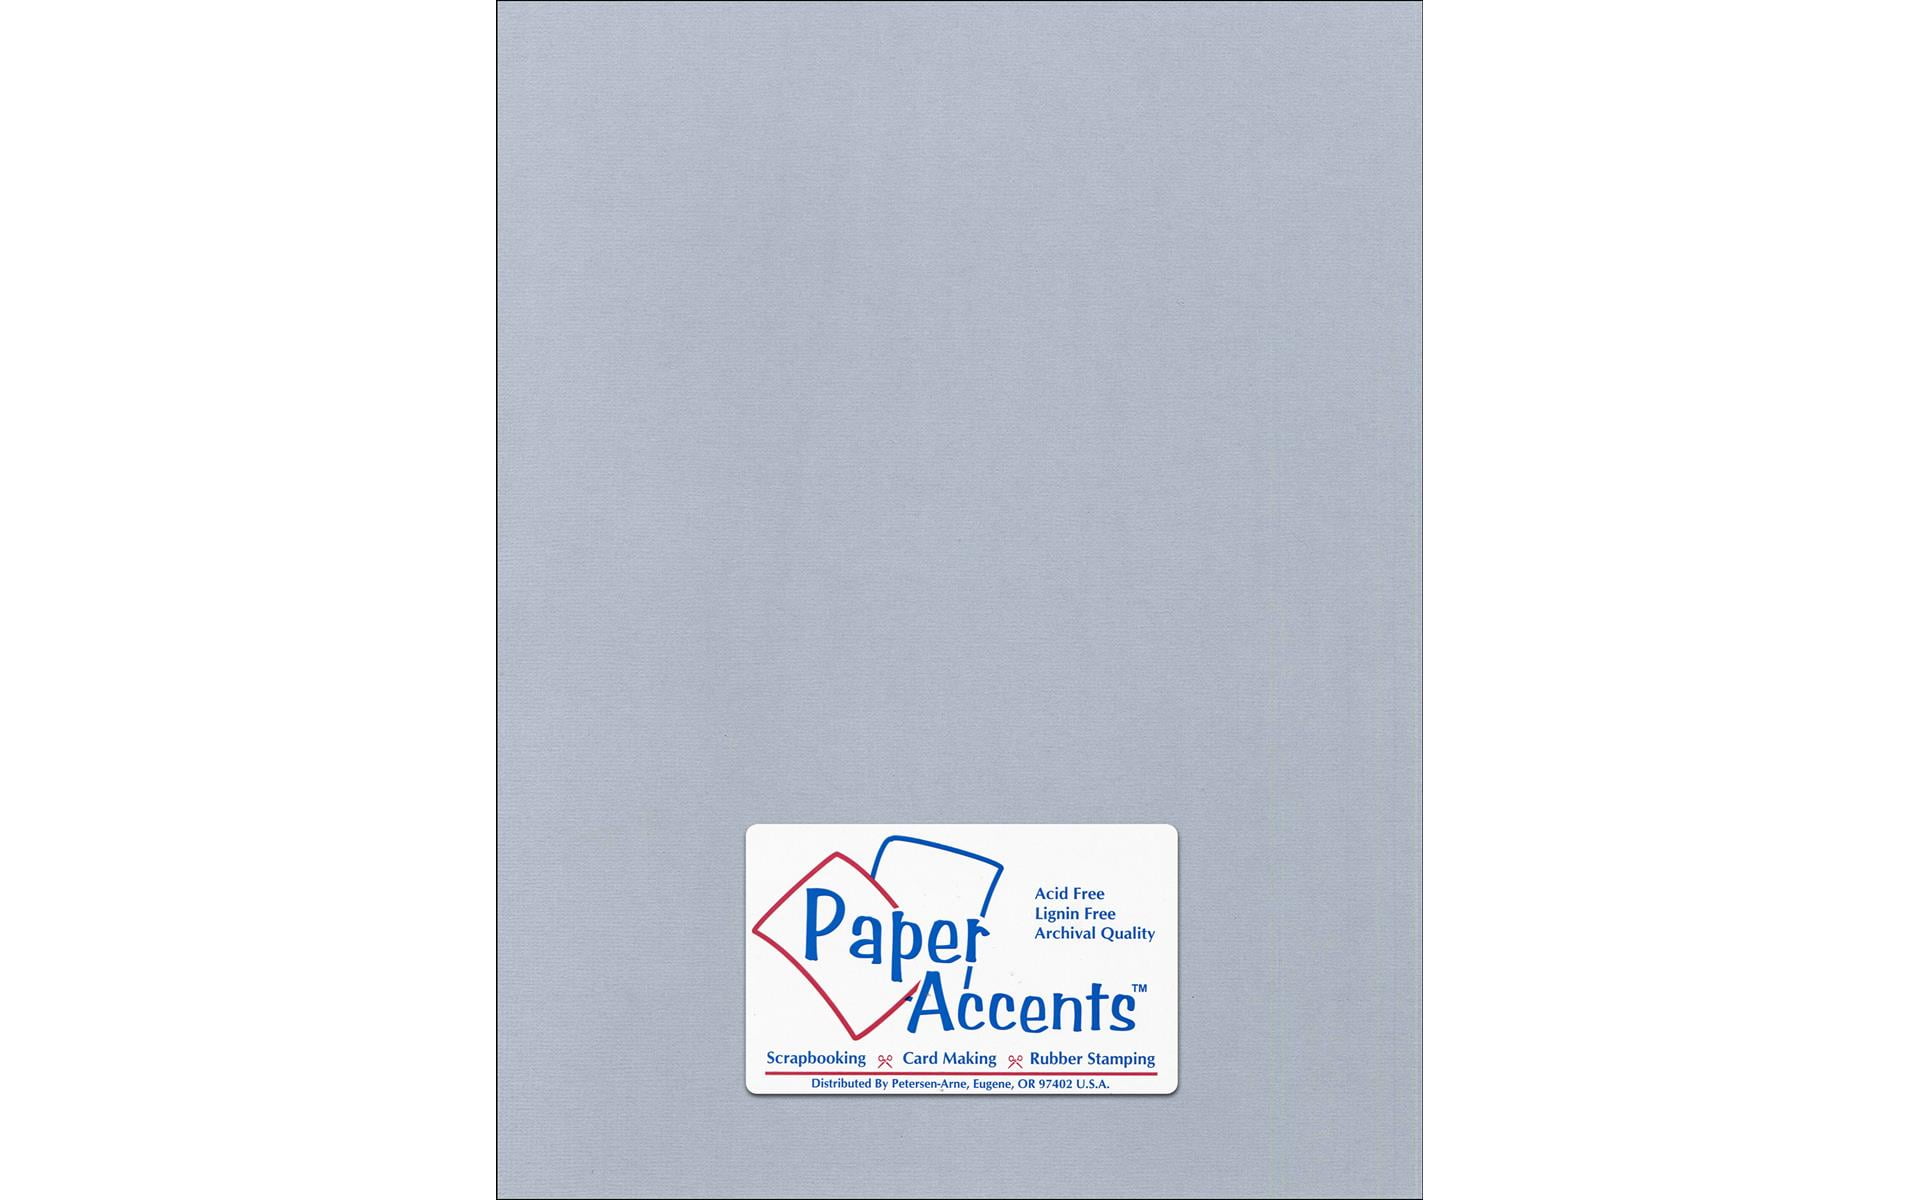 PA Paper Accents Muslin Cardstock 8.5 x 11 Ladybug, 73lb colored cardstock  paper for card making, scrapbooking, printing, quilling and crafts, 25  piece pack